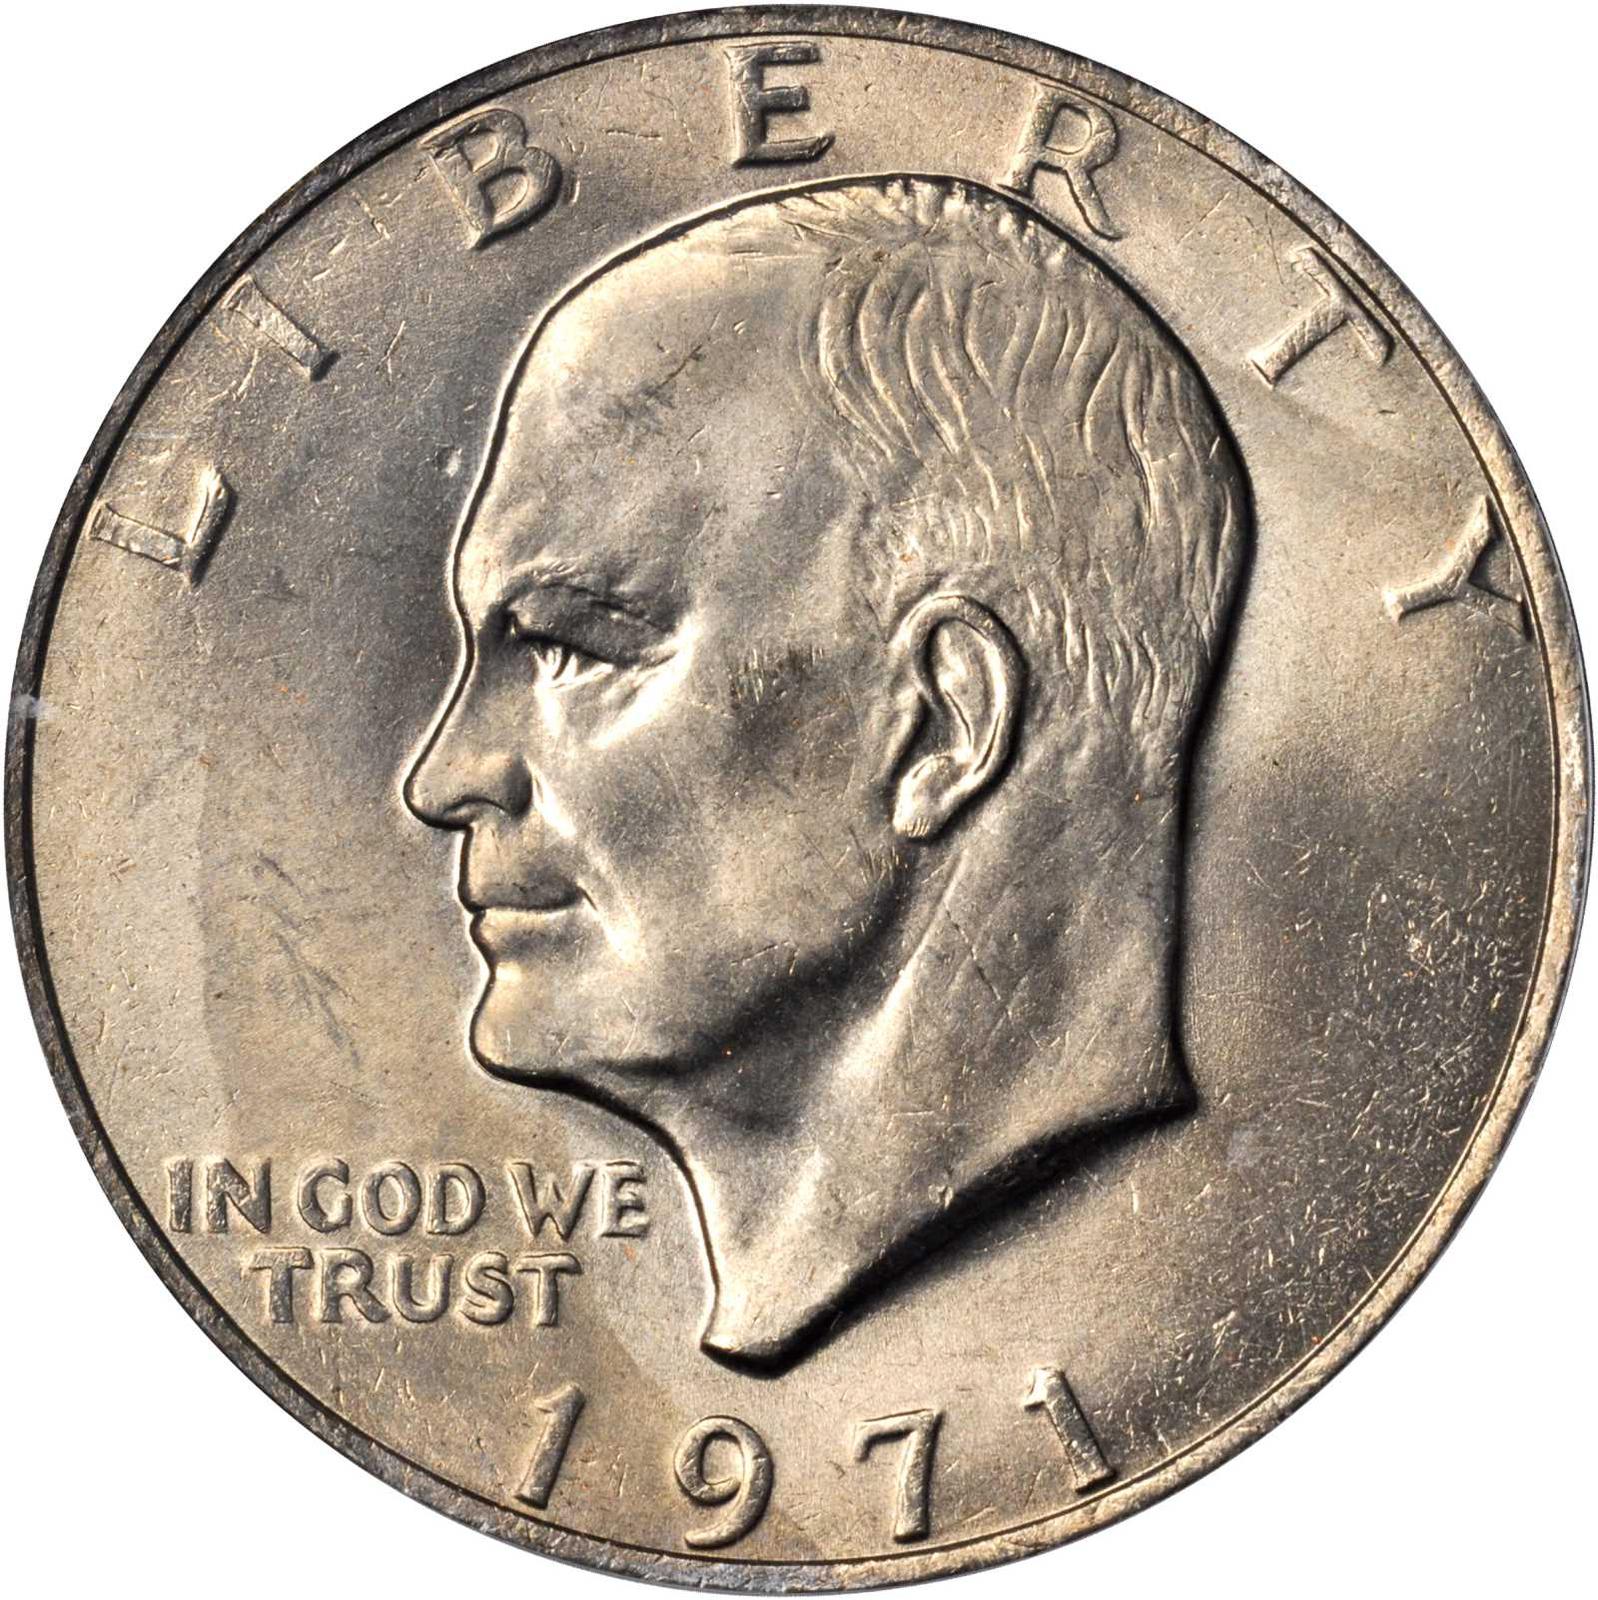 United States Of America One Dollar Coin 1971 Value - New Dollar Wallpaper HD Noeimage.Org1598 x 1600